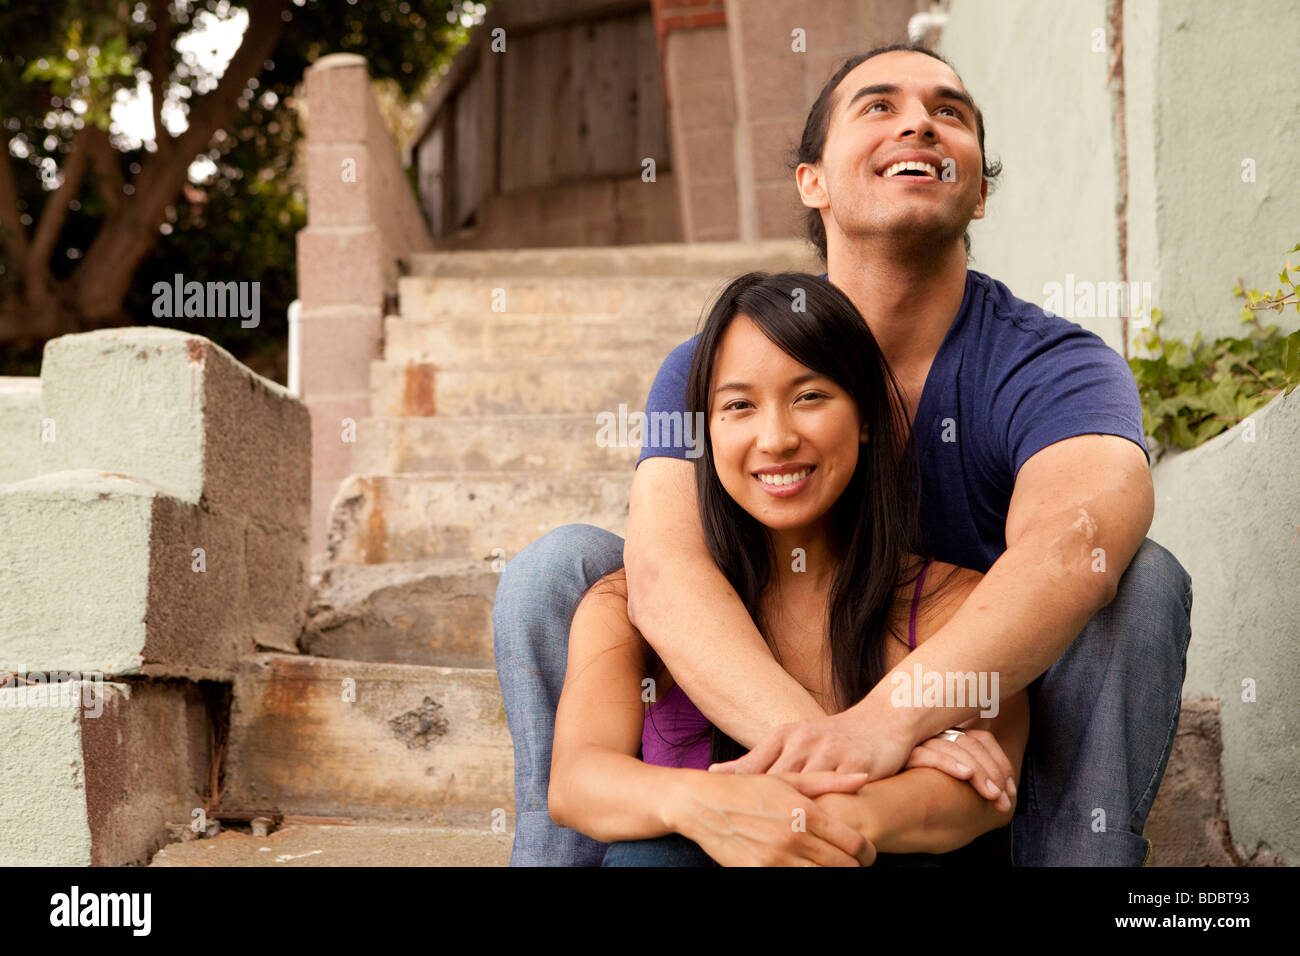 Male and female couple sitting on concrete steps, his arms are around her.  Looking at camera.  Woman is Filipino. Stock Photo